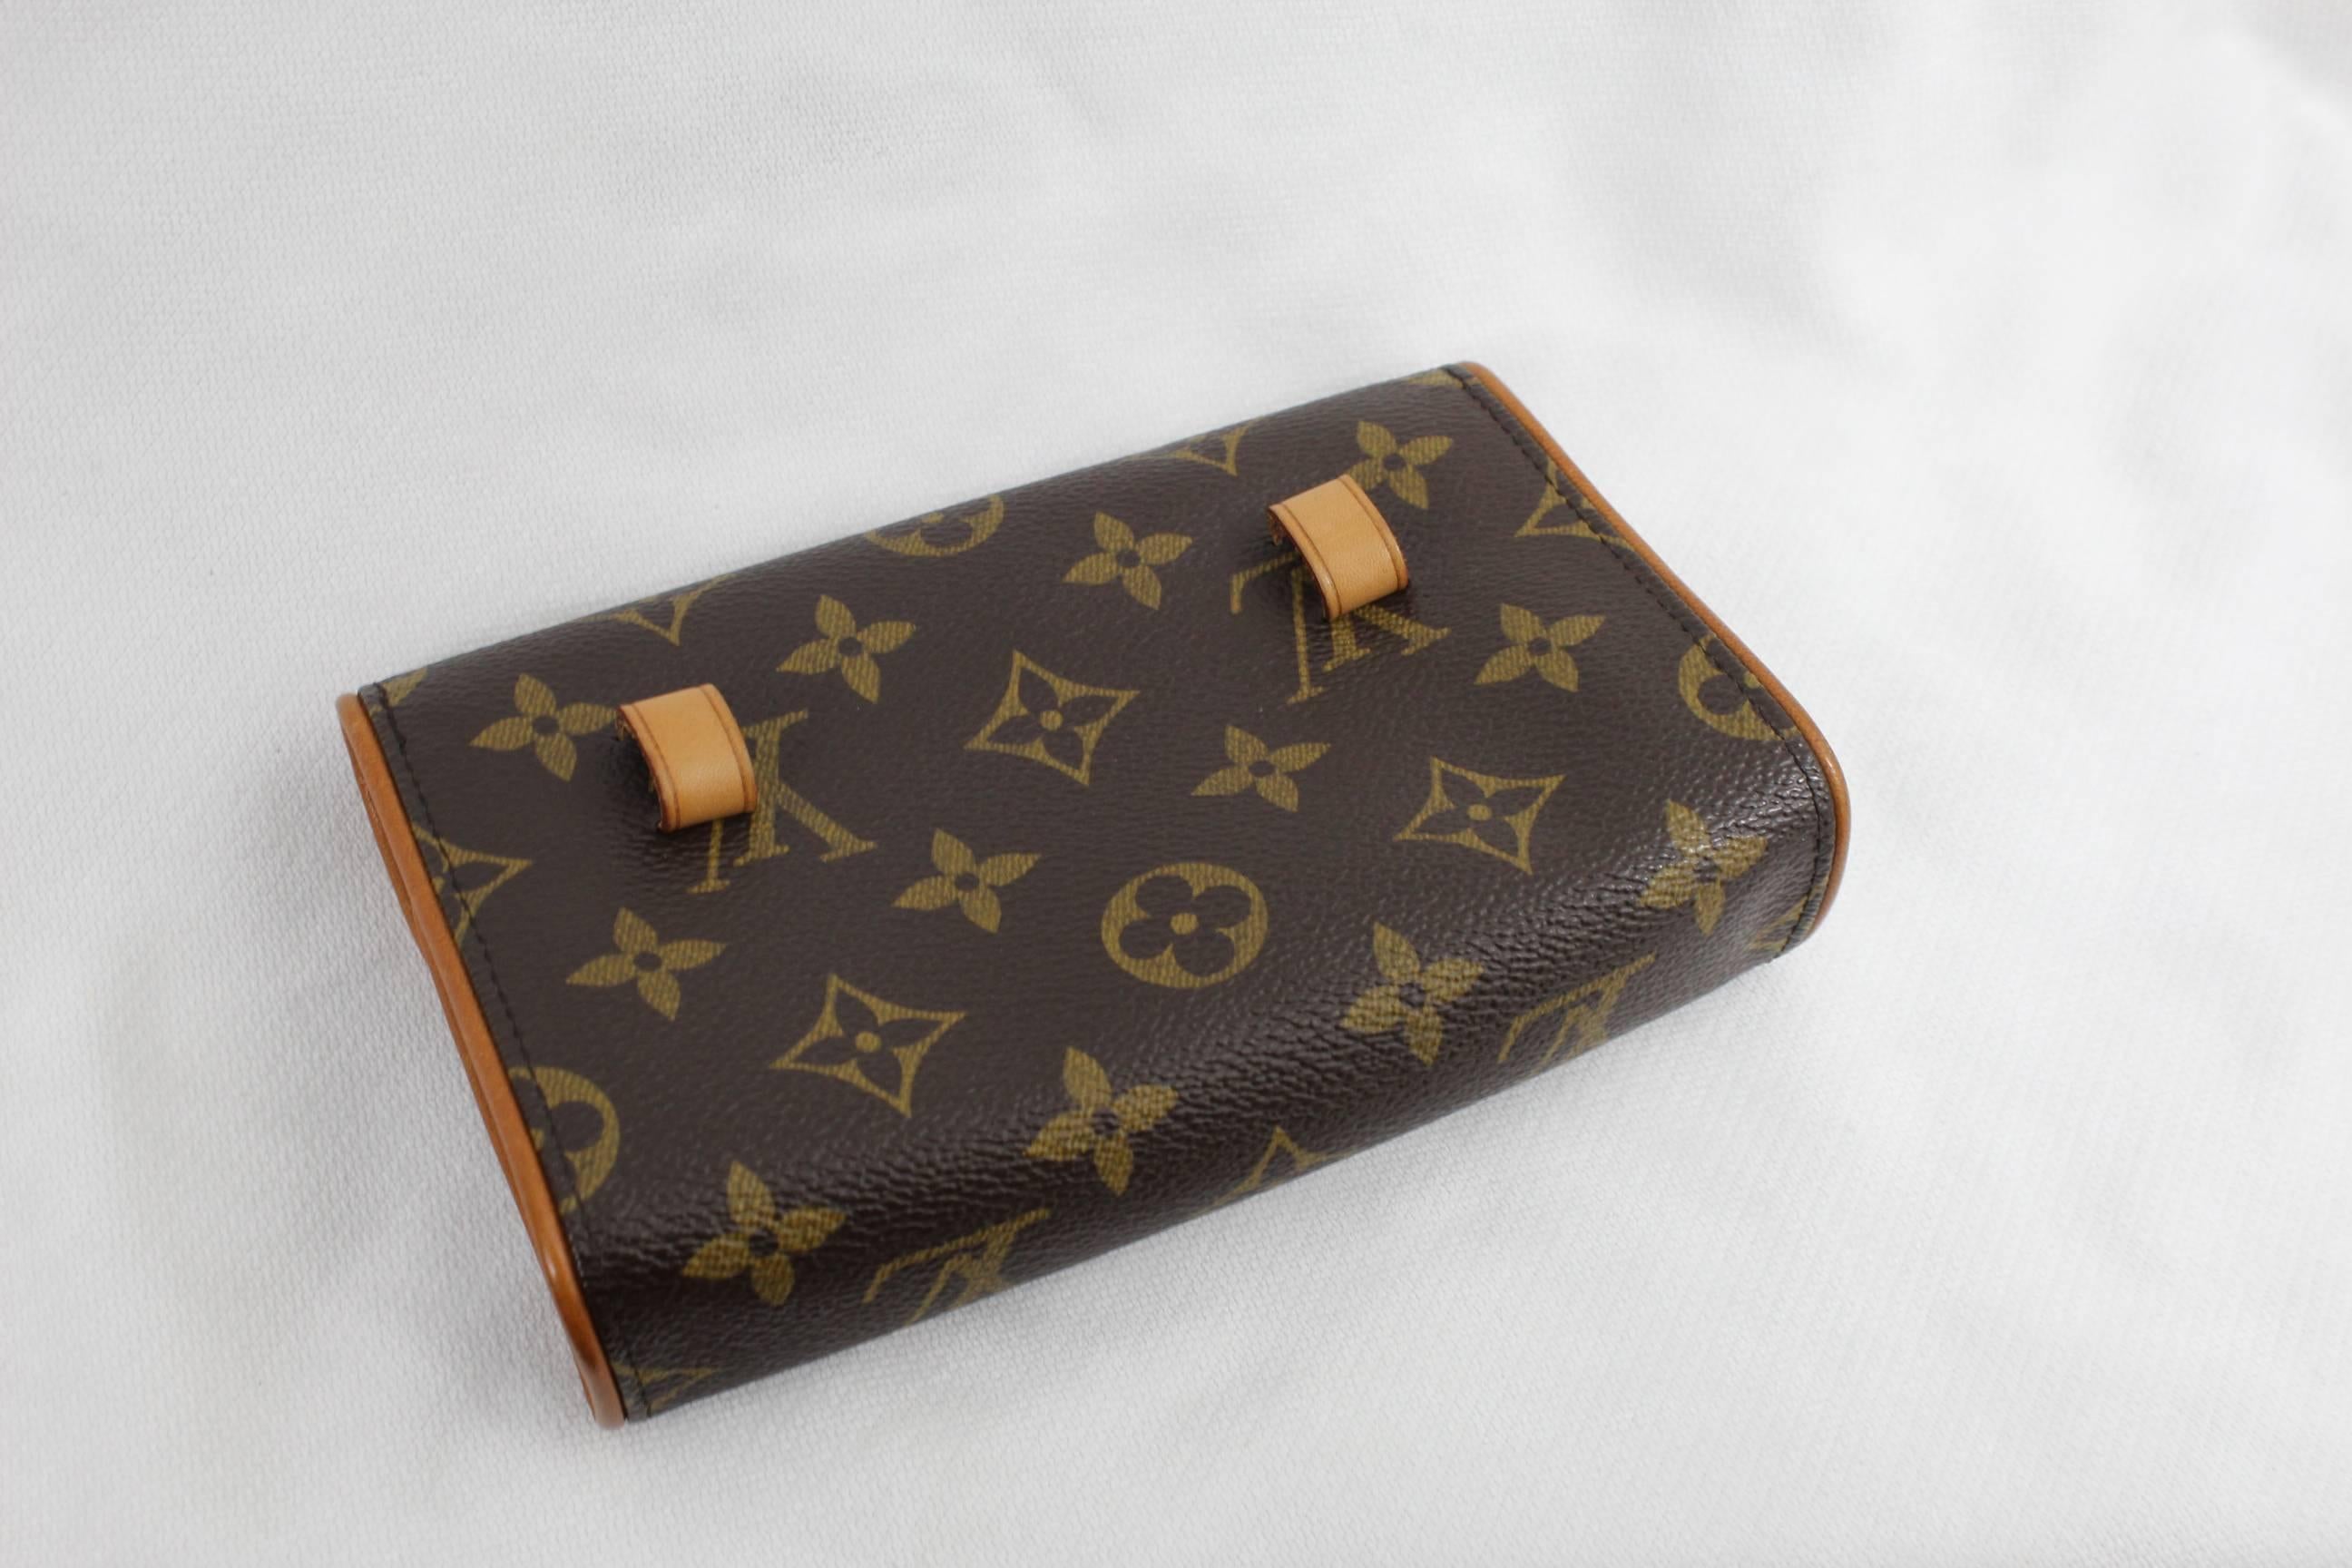 Louis Vuitton Floretine Belt bag in monogram Canvas


Sold without Belt

Really good condiiton

Size 6.5x4